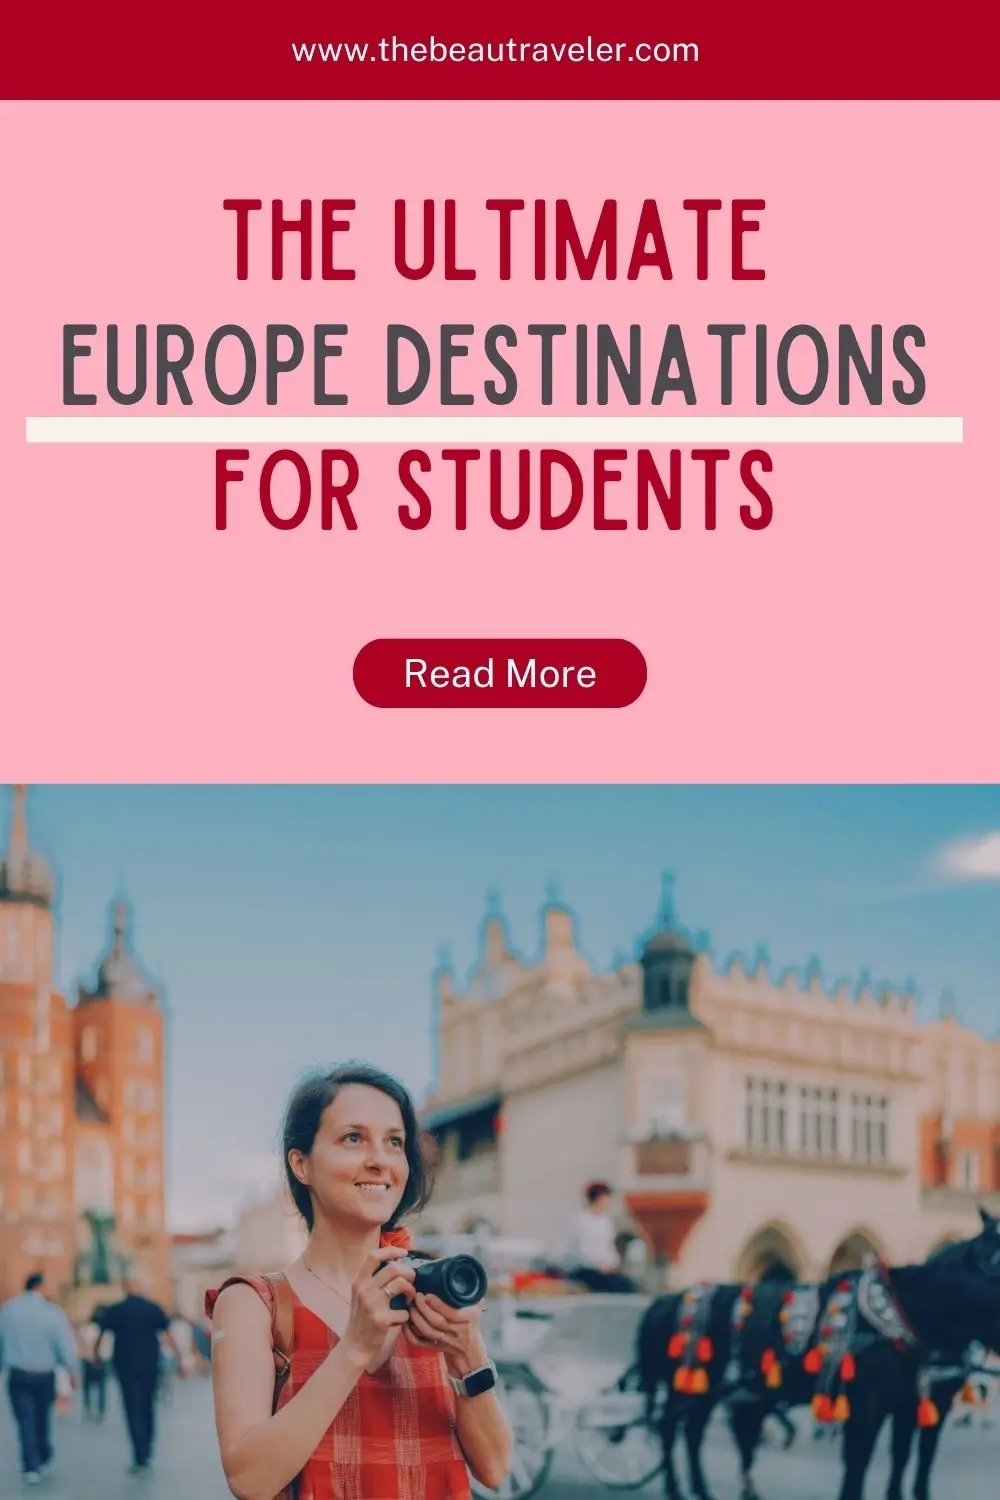 7 Best Destinations for Cheap Student Travel in Europe - The BeauTraveler